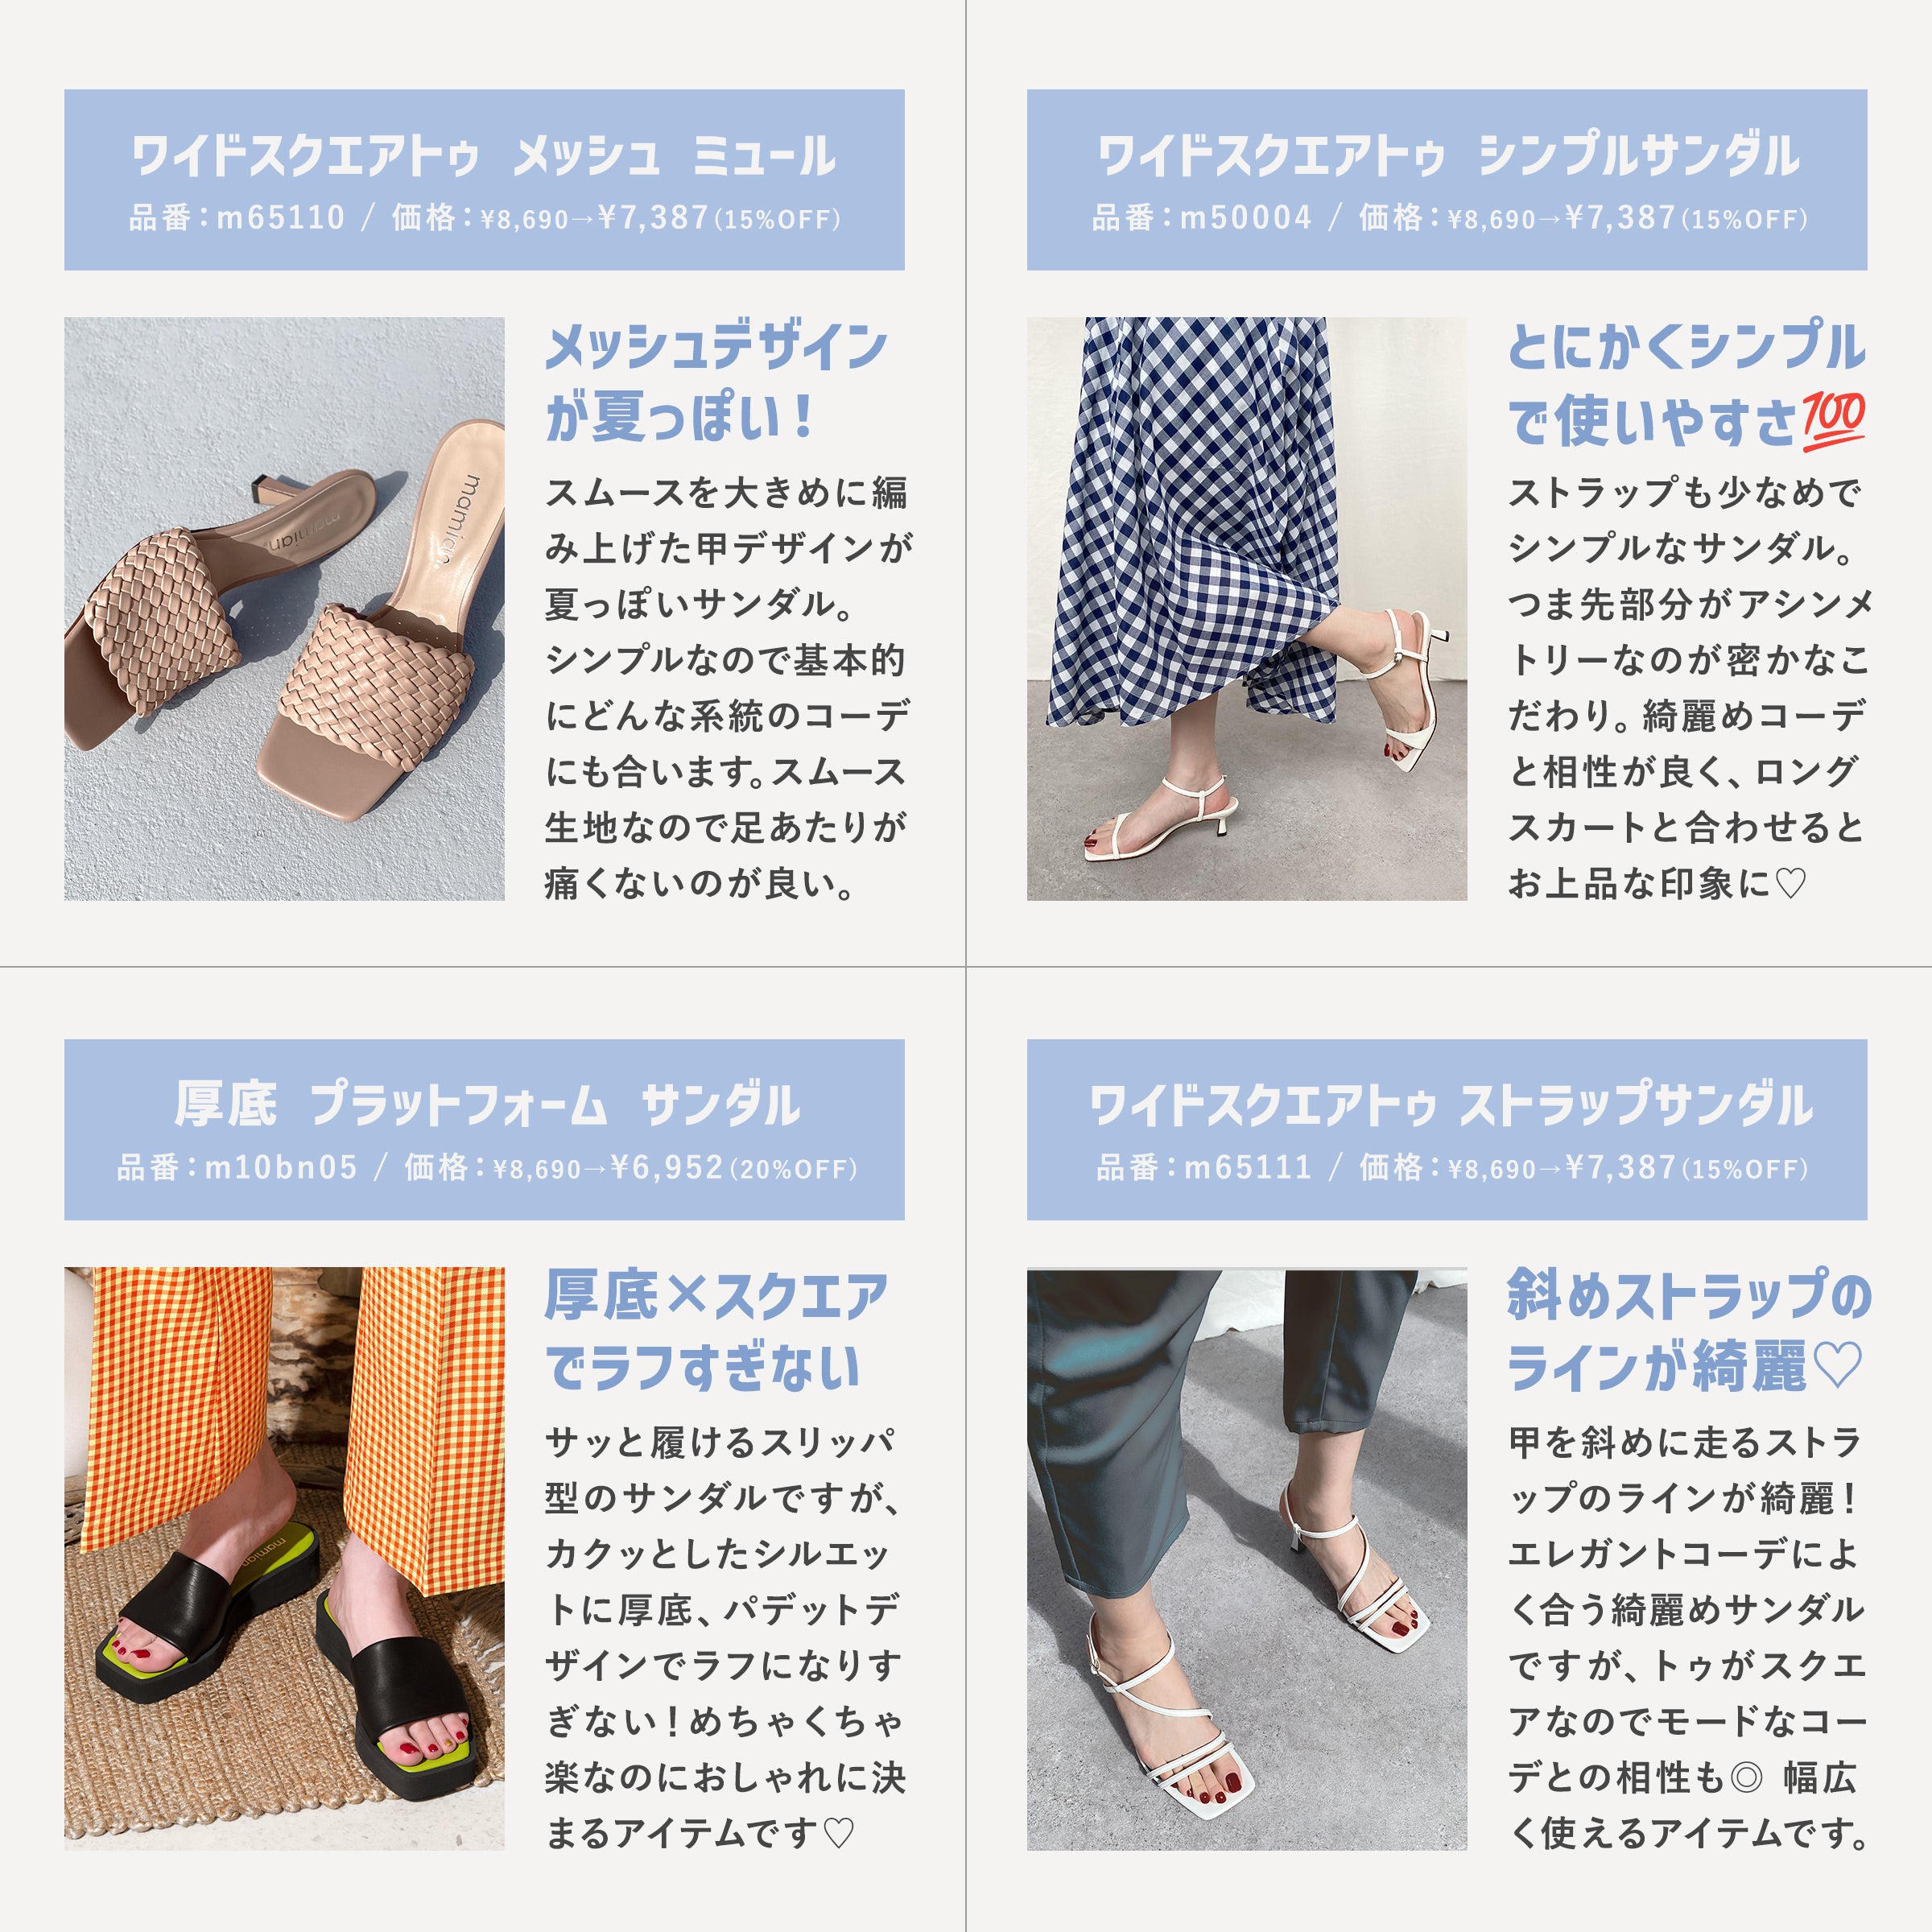 Wide square toe sandals feature